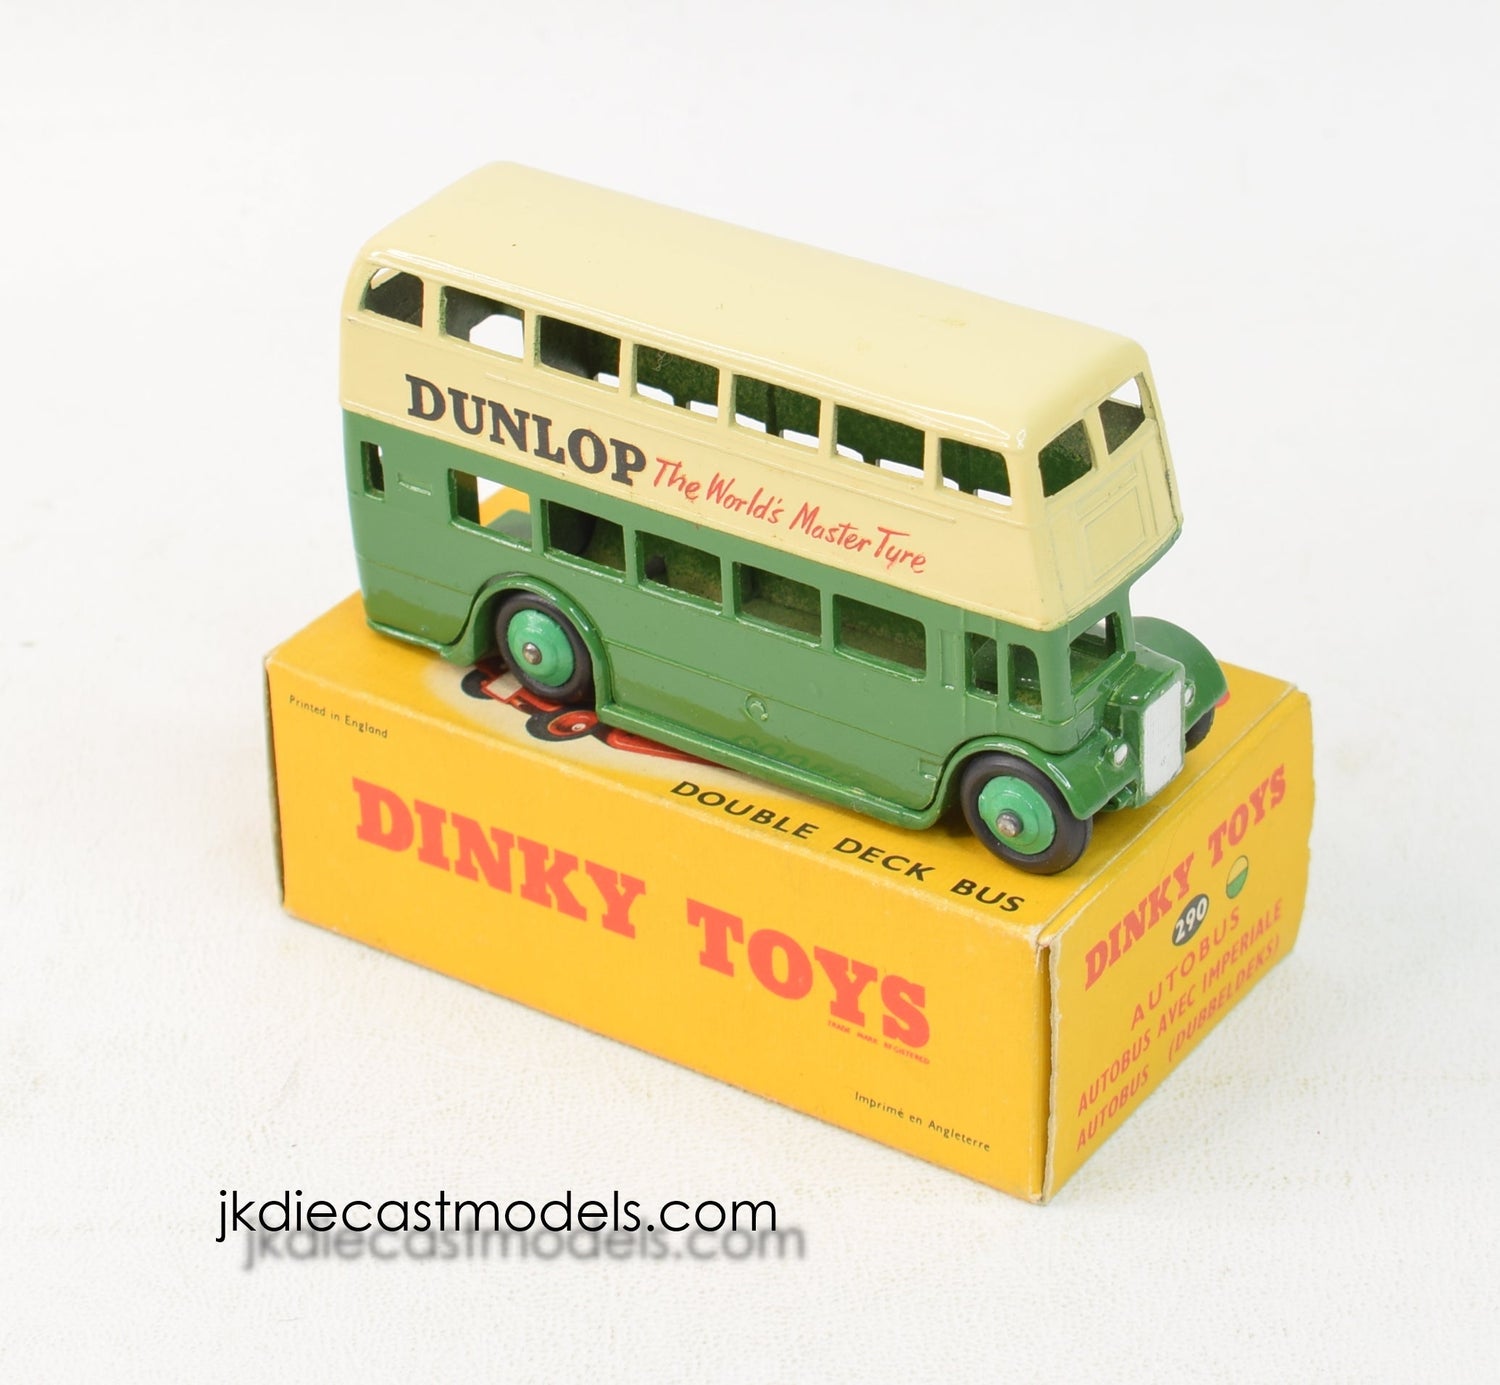 Dinky toys 290 Double deck bus 'Dunlop' Virtually Mint/Boxed